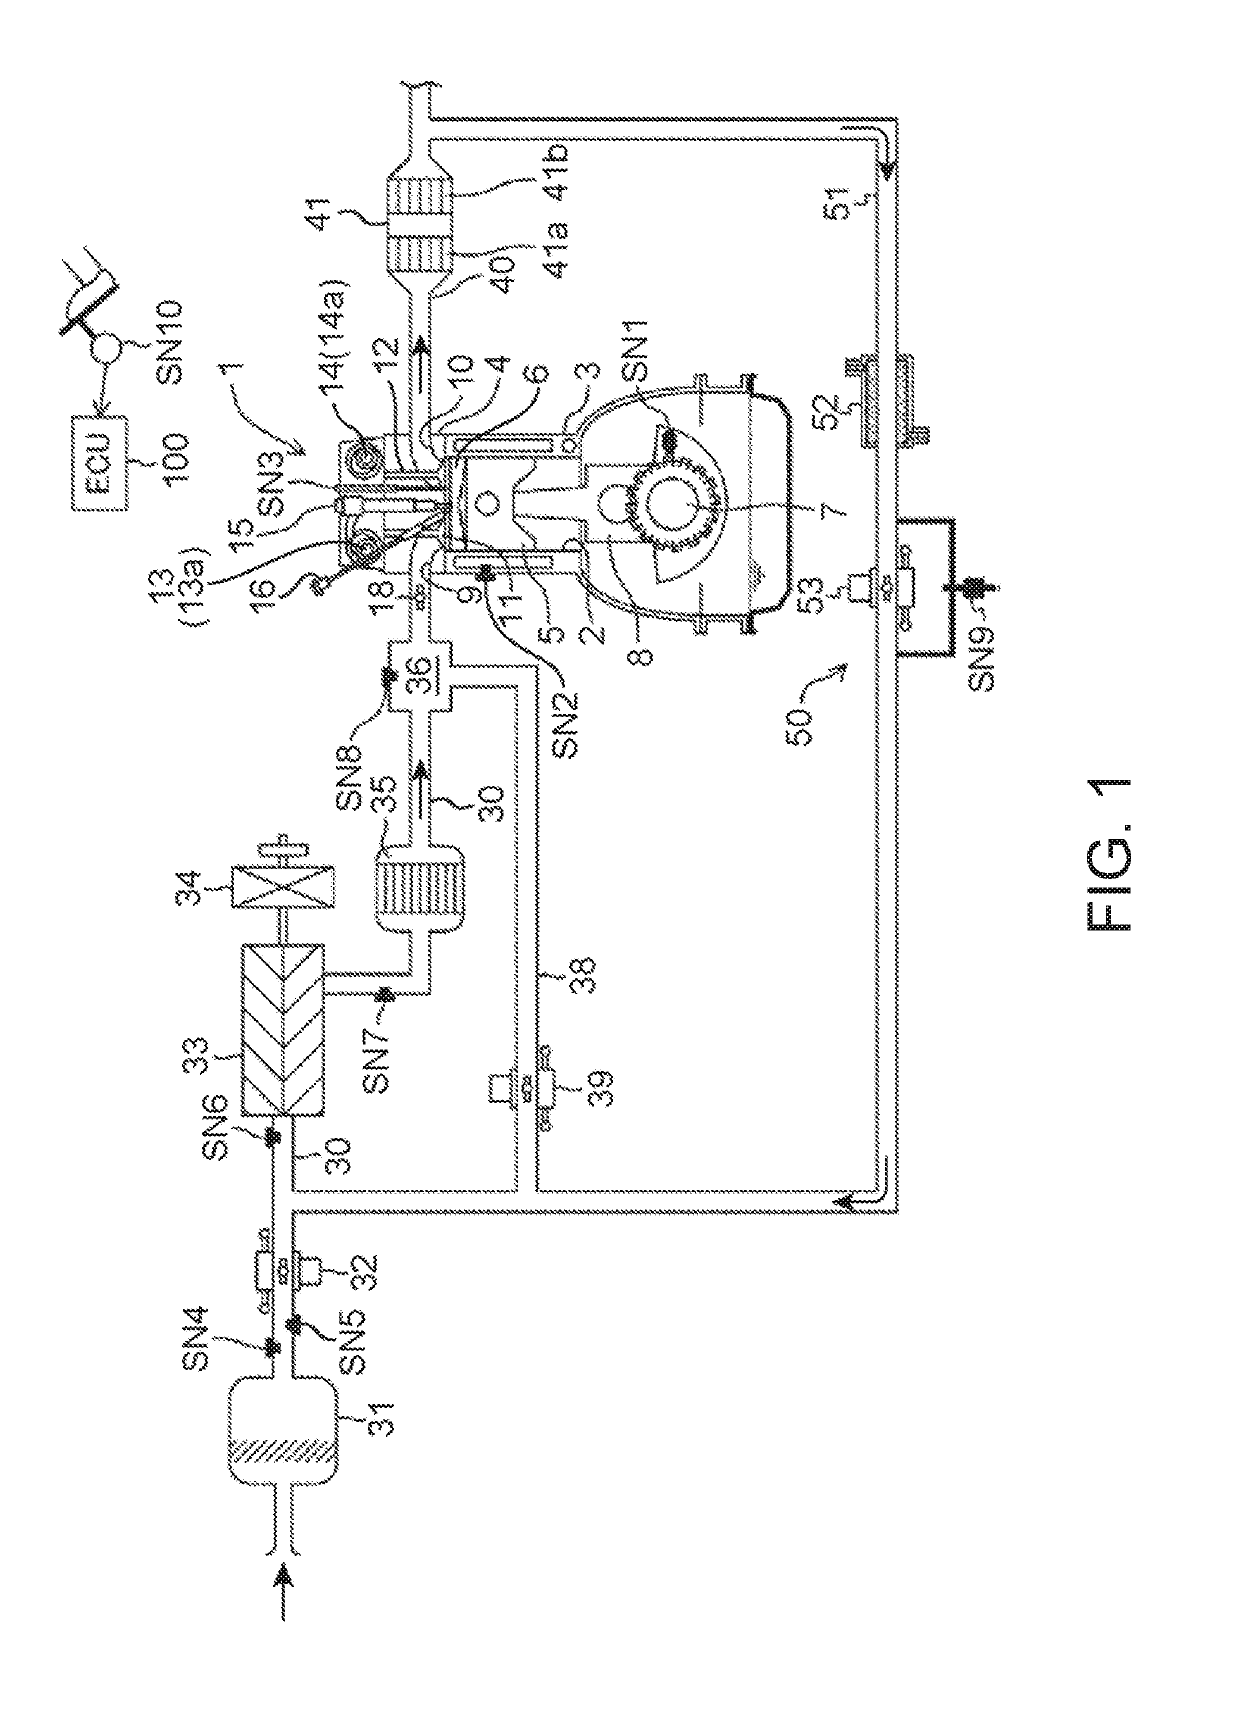 Control device for compression-ignition engine